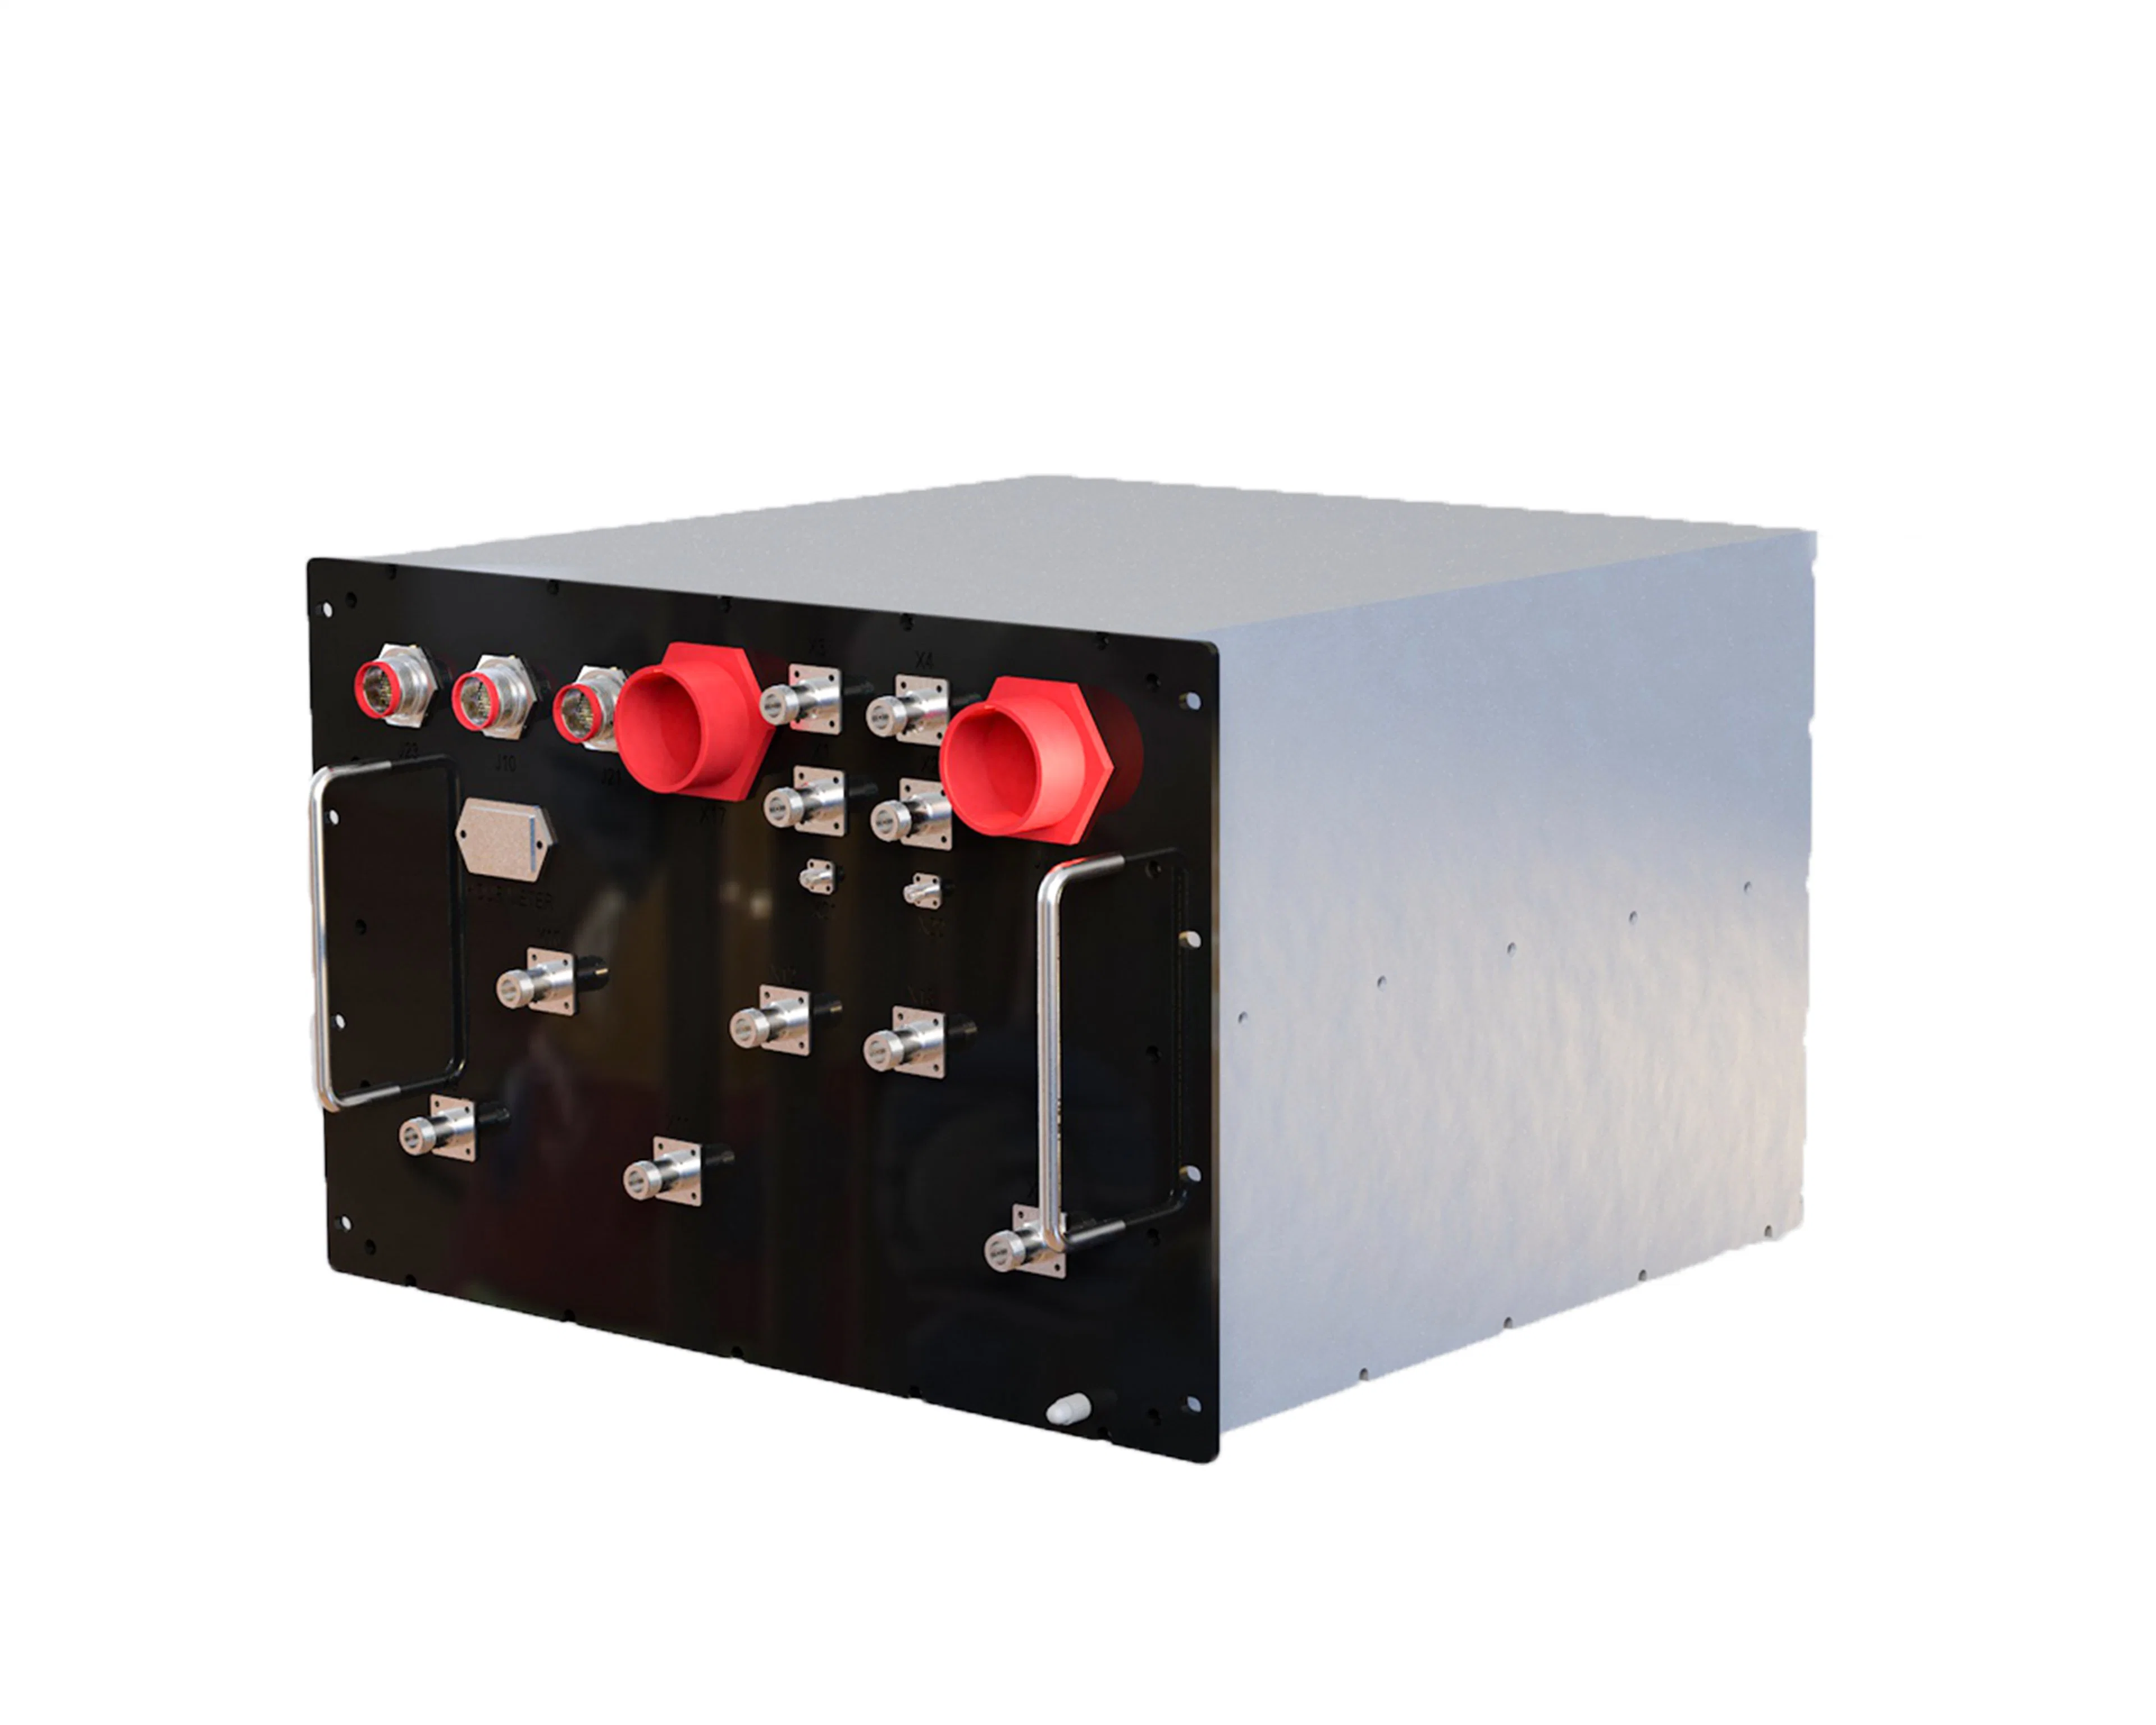 EMC Testing Power Tolerance Test Wireless Communication Interference Solid State Pulse Wave Power Amplifier and RF Power Amplifier Module